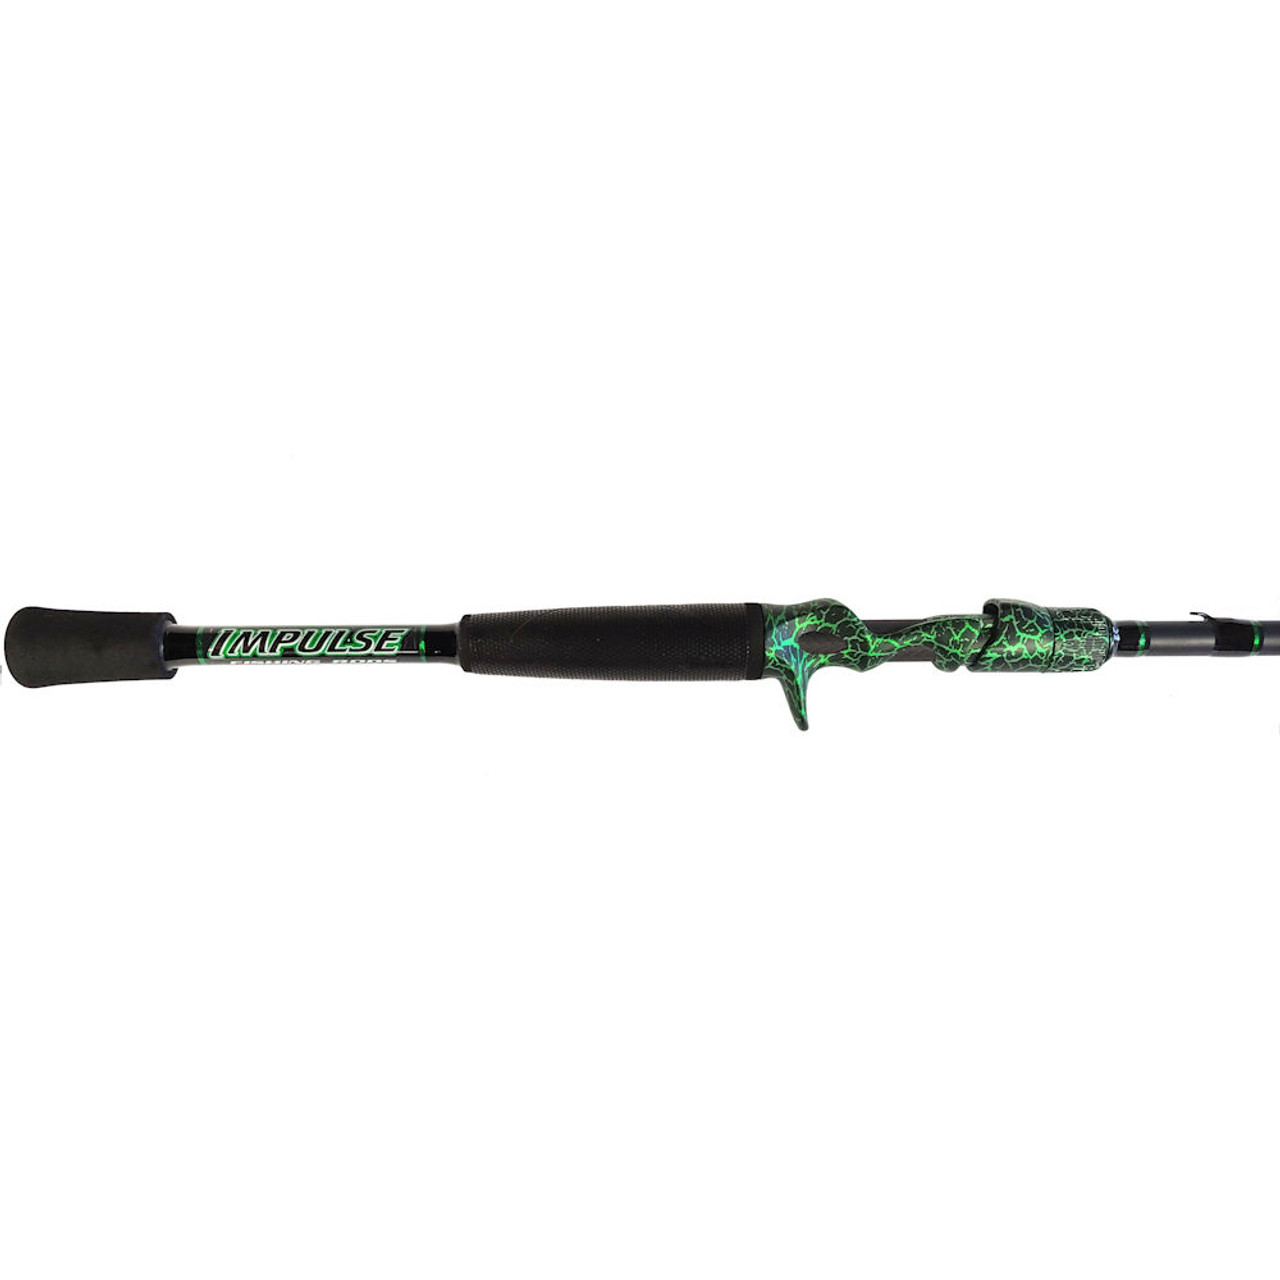 Cheap, Durable, and Sturdy Toray Fishing Rod Blank For All